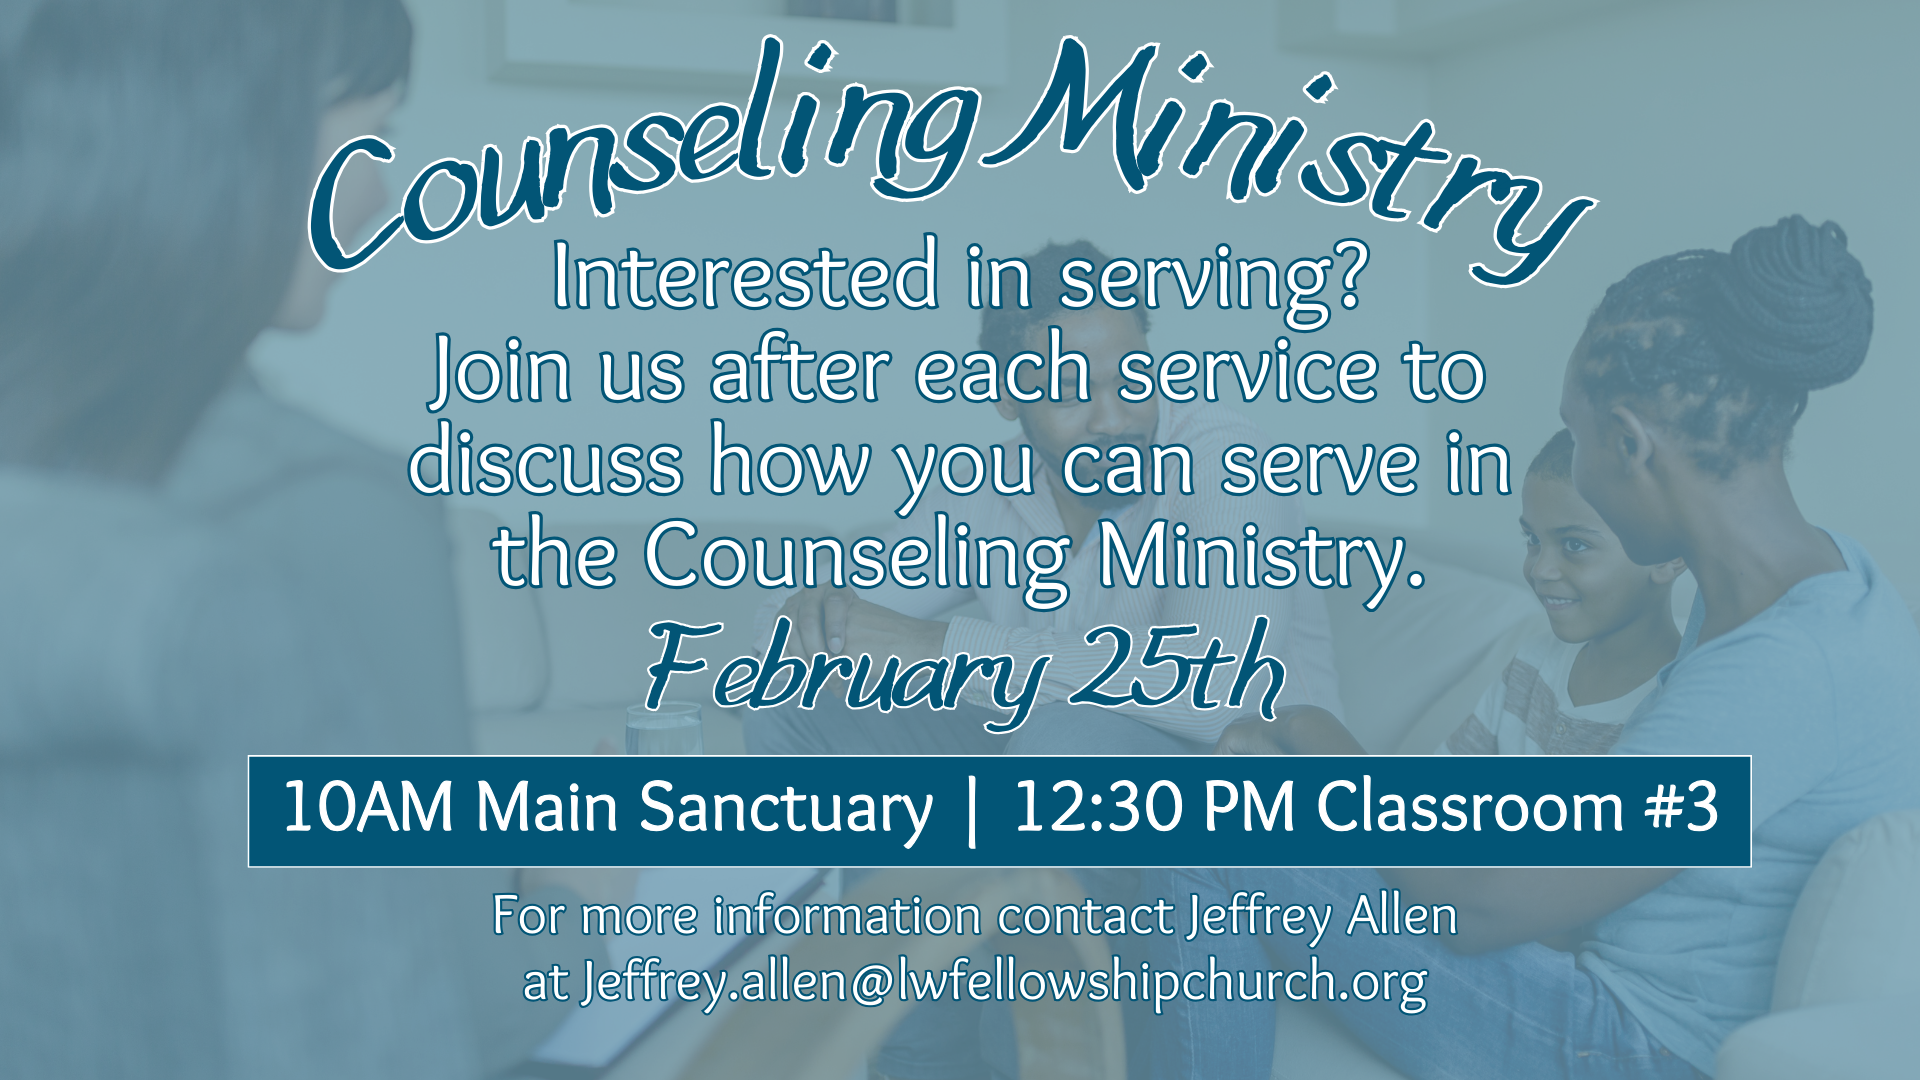 Counseling Ministry Informational head image